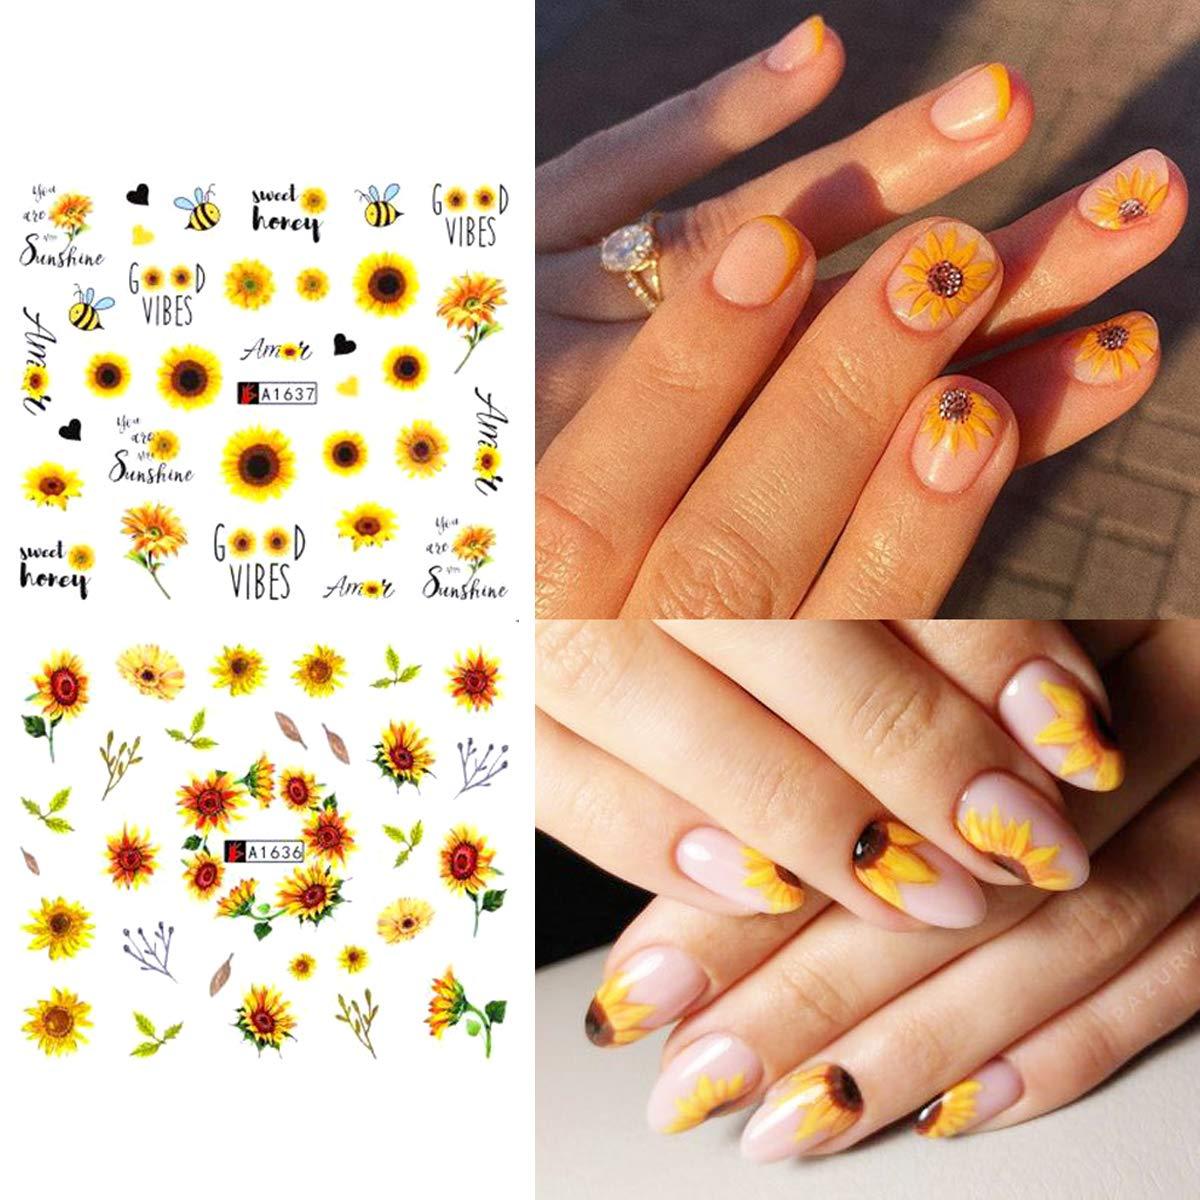 NEW NAIL ART 2023 🌻 Sunflower Nails 3 Different Ways! - YouTube